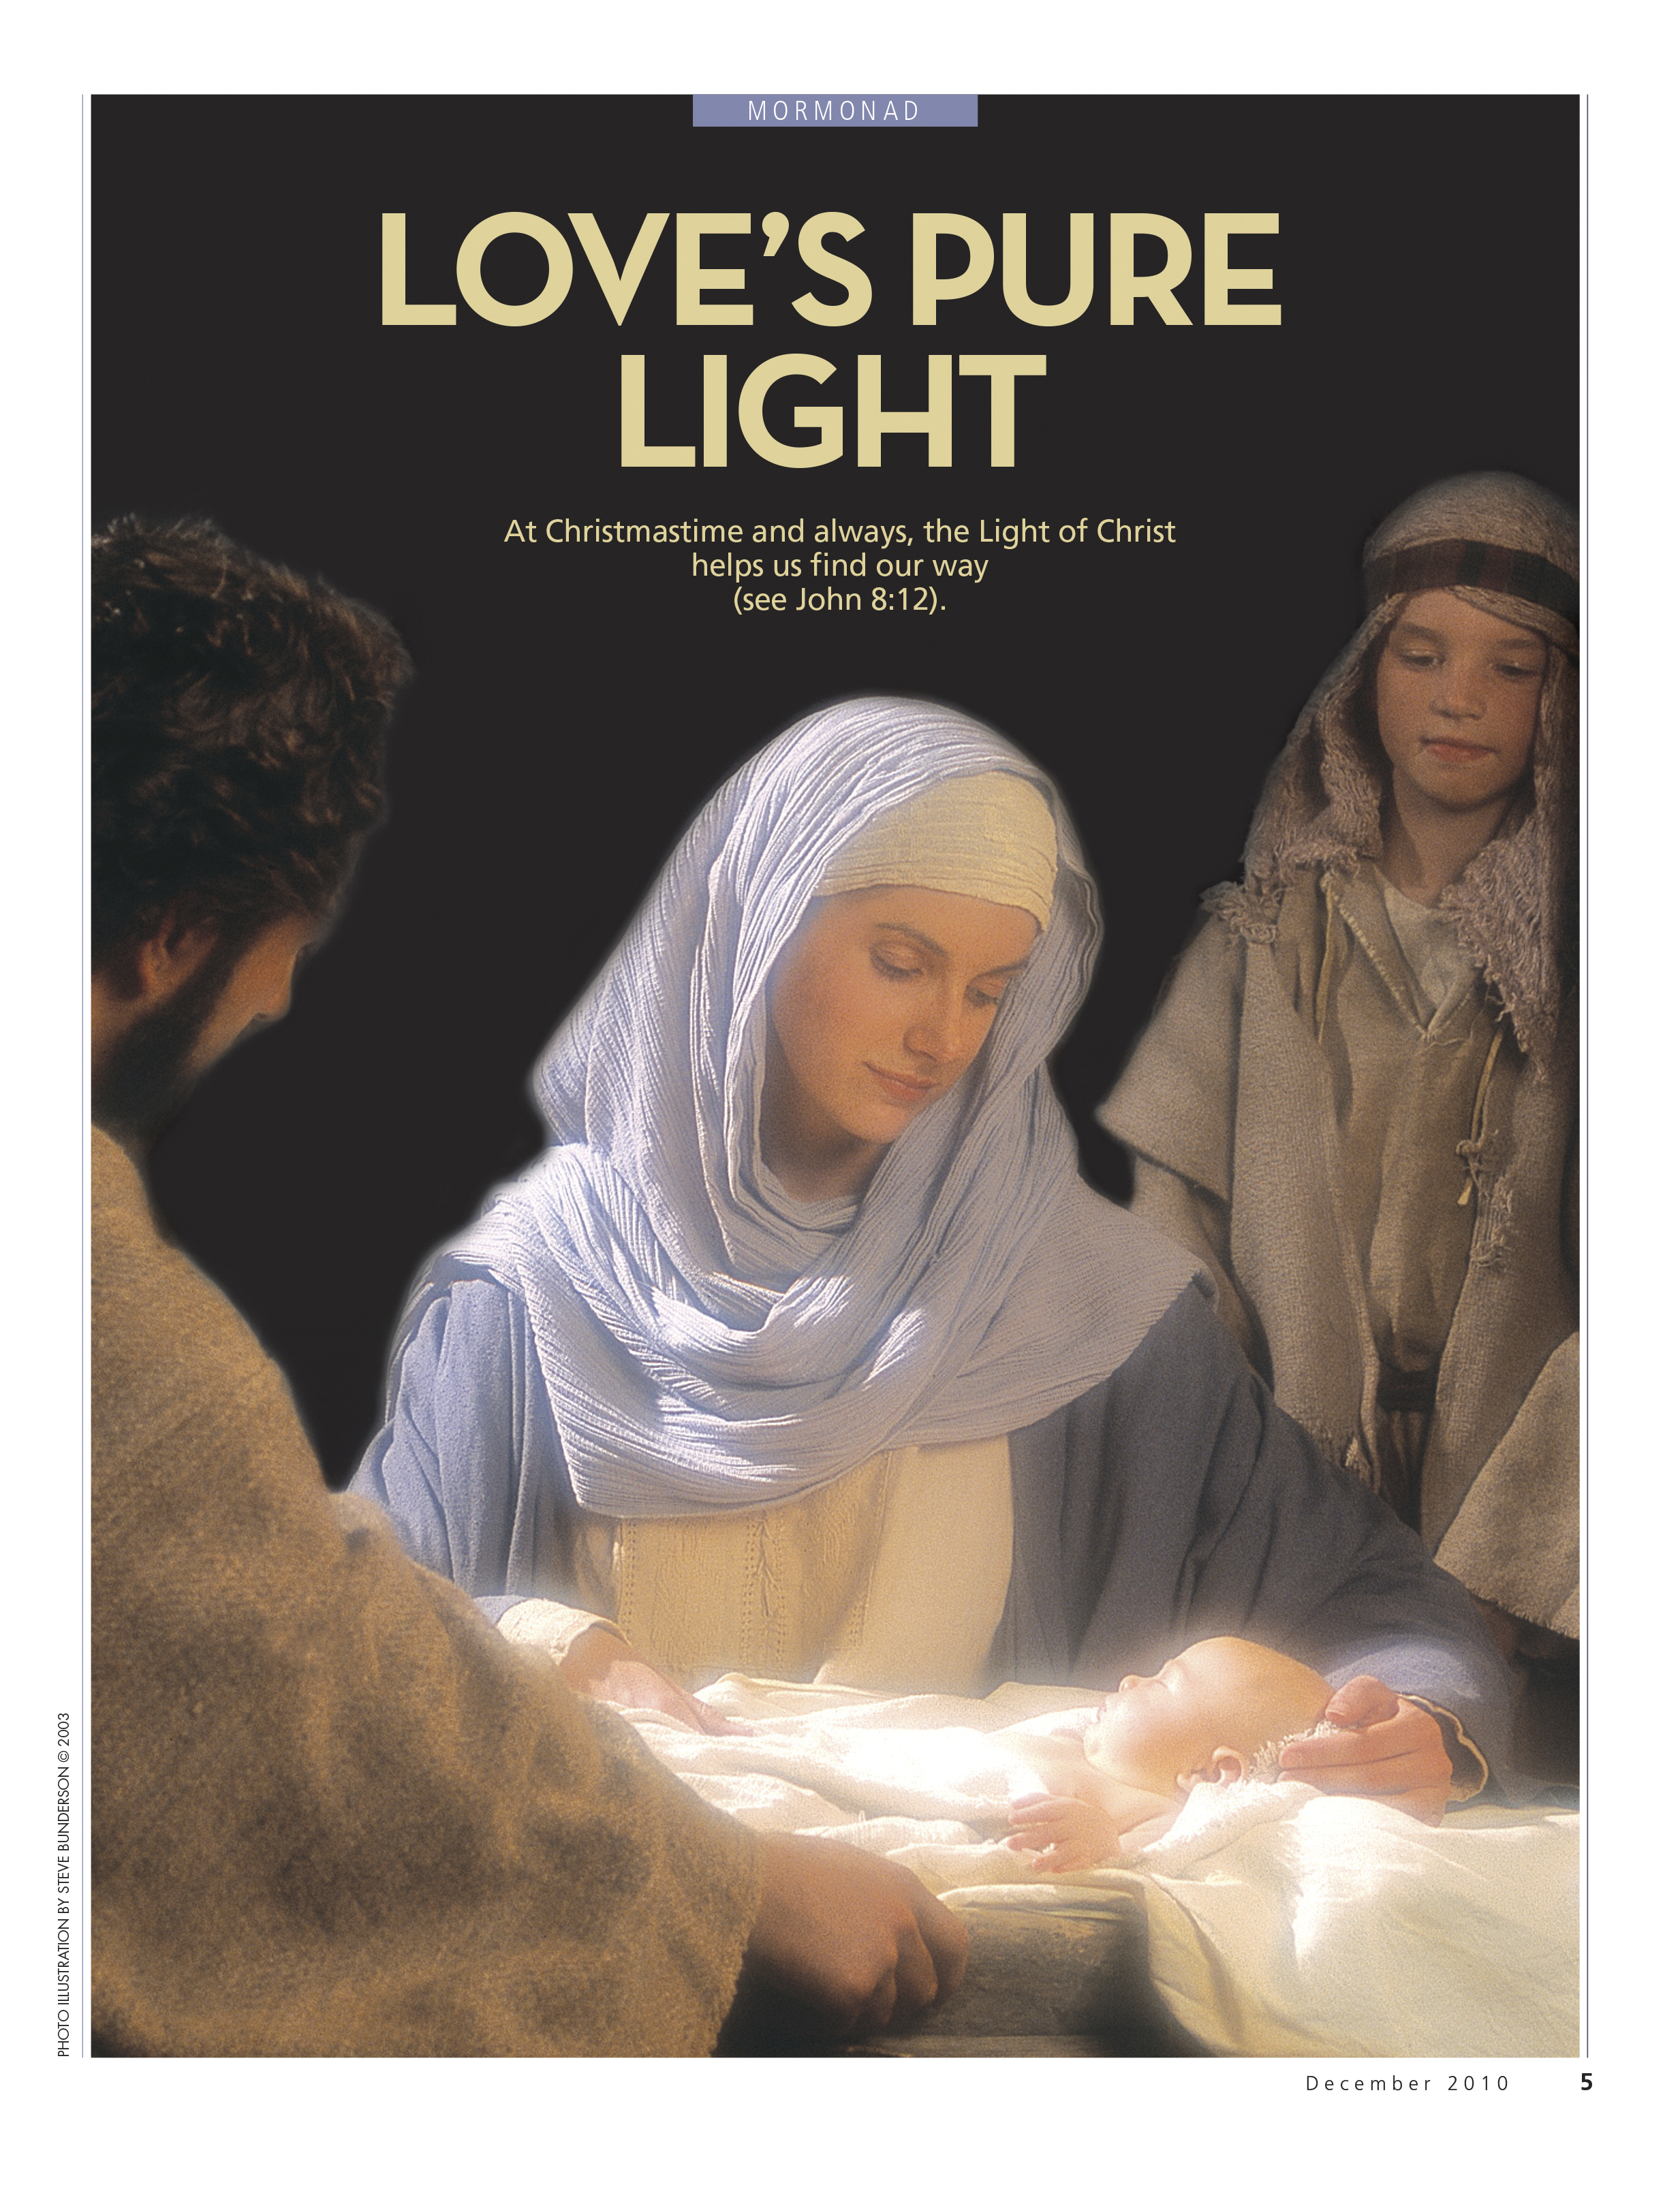 Love’s Pure Light. At Christmastime and always, the Light of Christ helps us find our way (see John 8:12). Dec. 2010 © undefined ipCode 1.